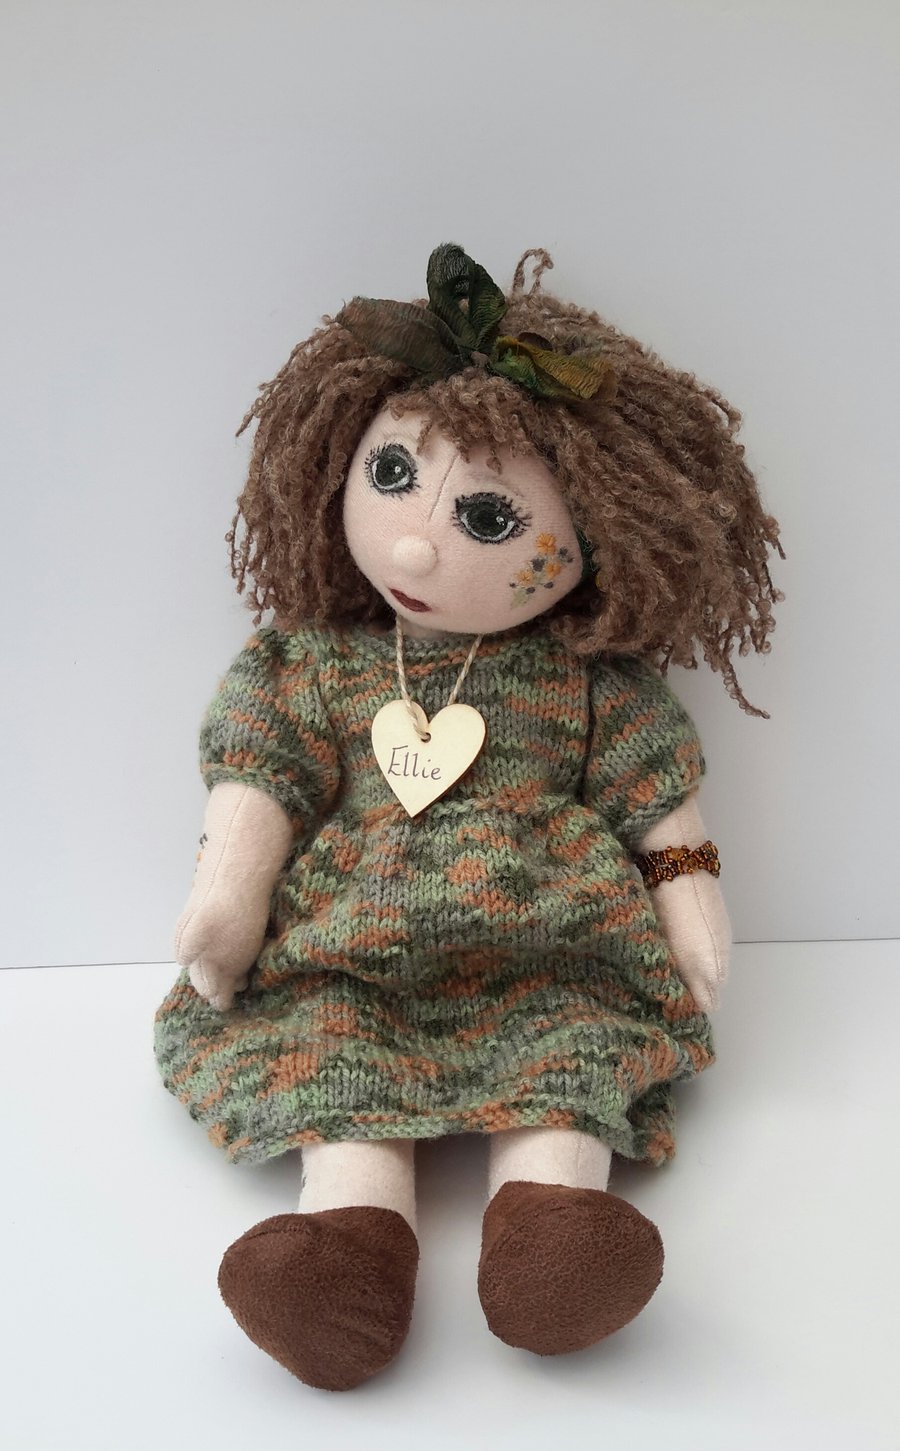 Ellie, 16" Collectable doll, Handmade Embroidered Doll by Bearlescent